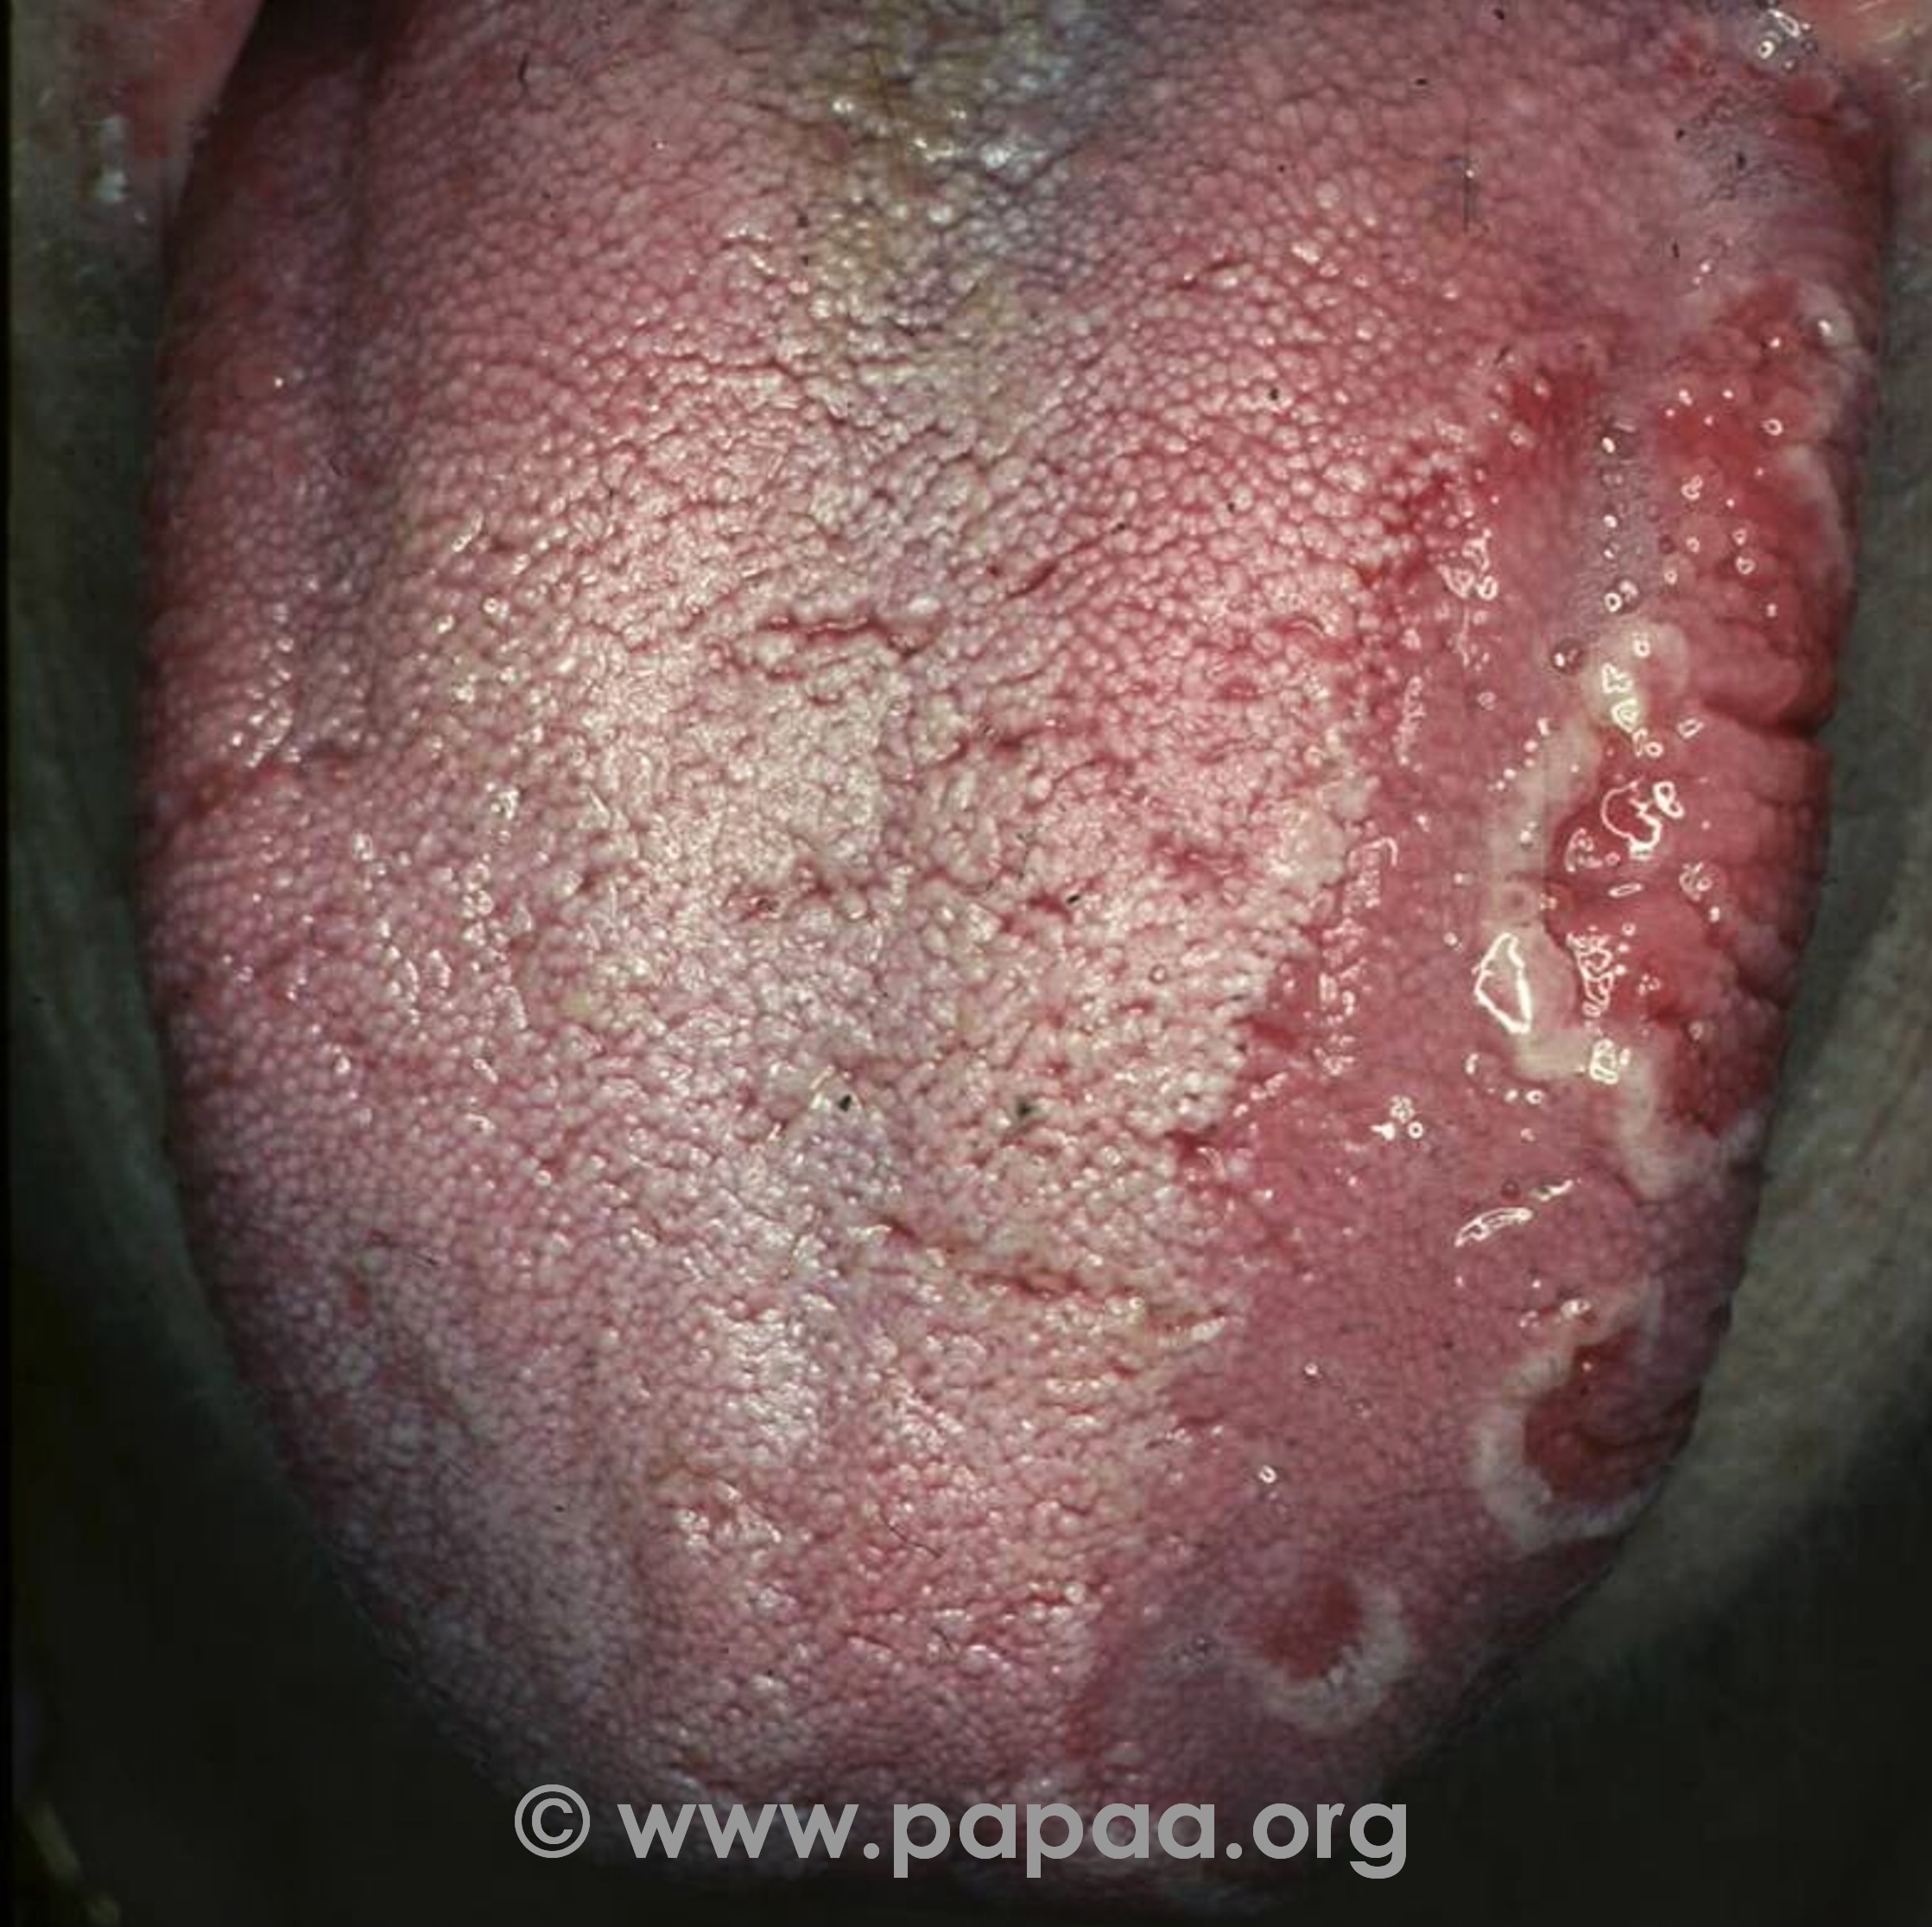 Geographic tongue (psoriasis)